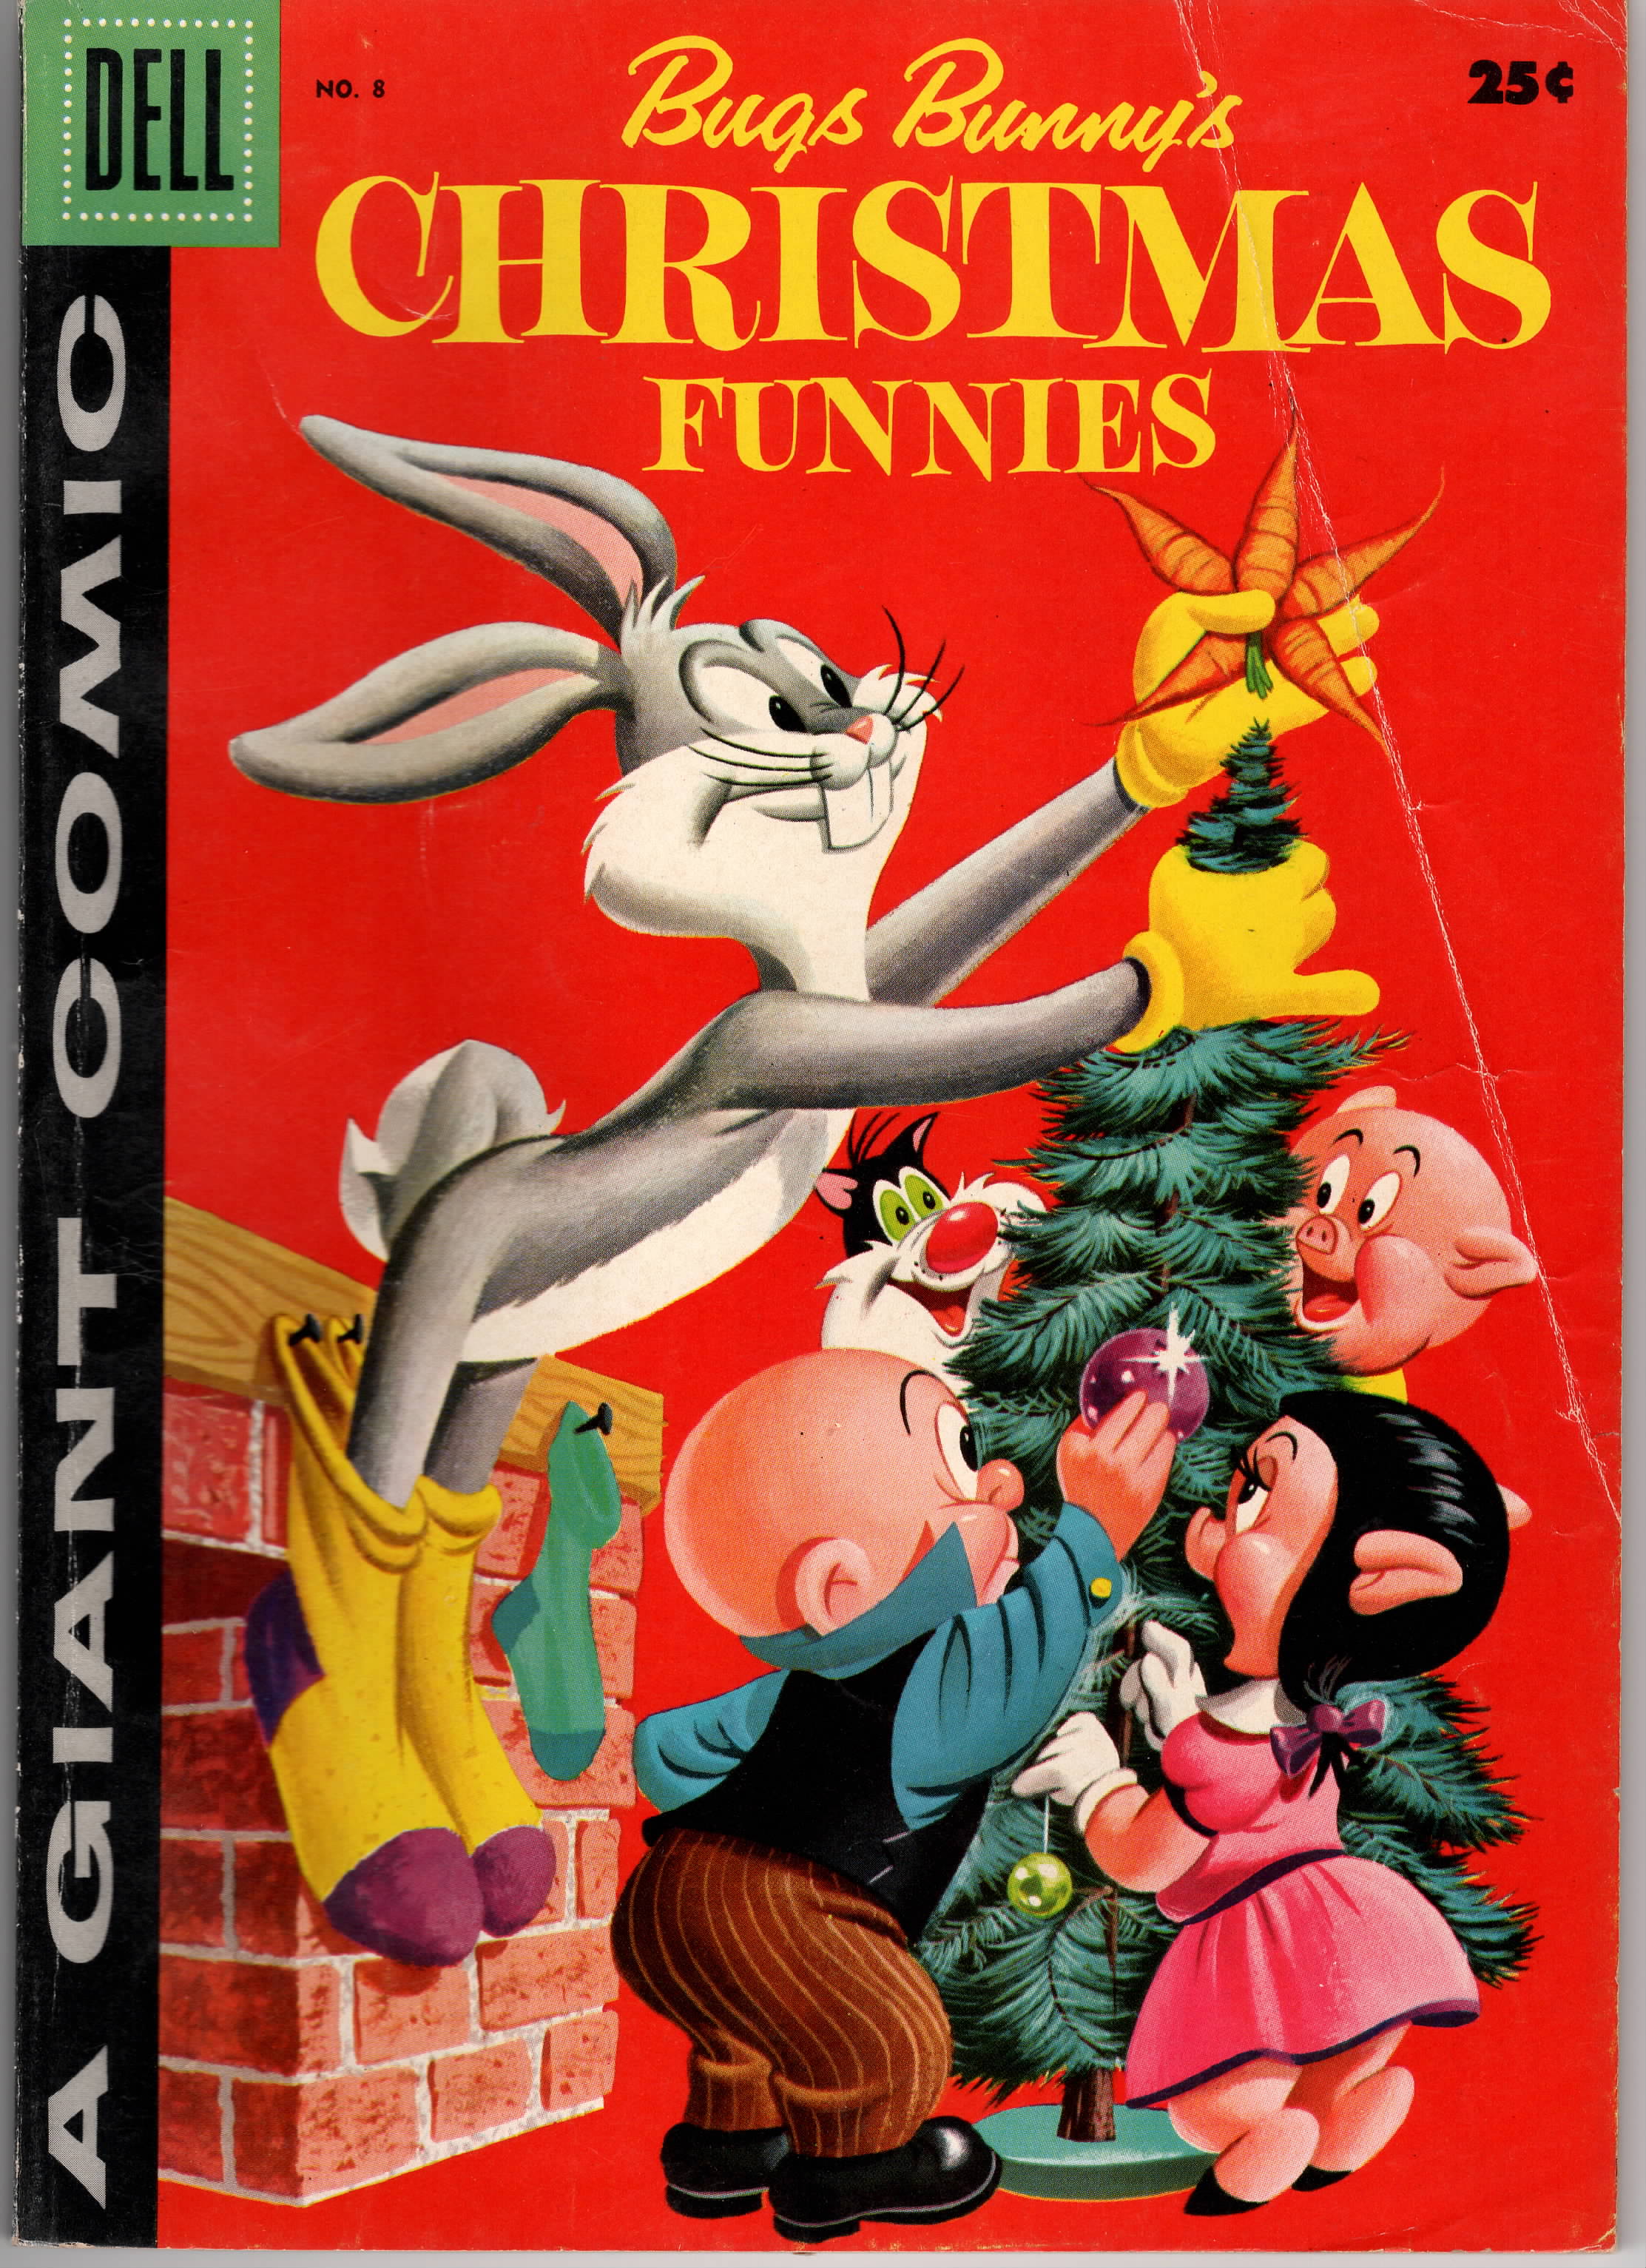 Dell Giant: Bugs Bunny's Christmas Funnies #8